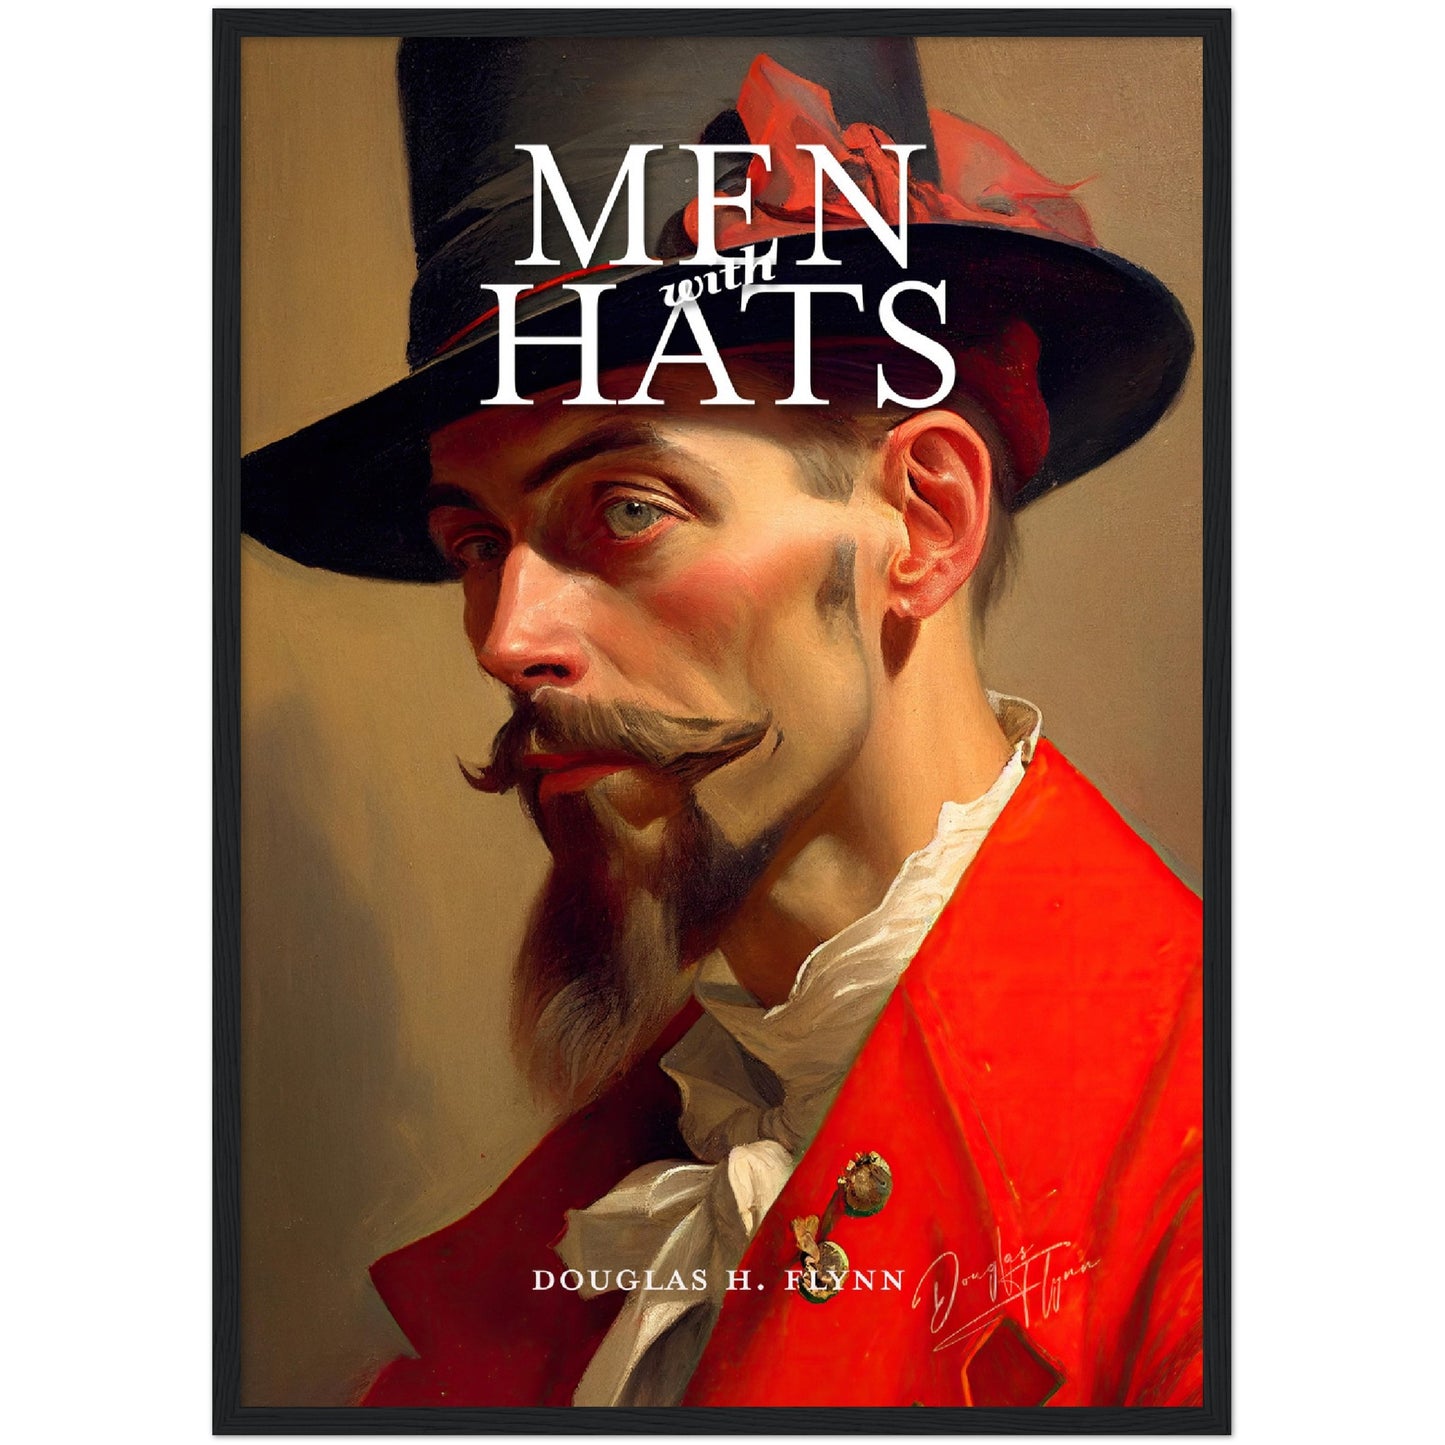 »Men With Hats« merch poster